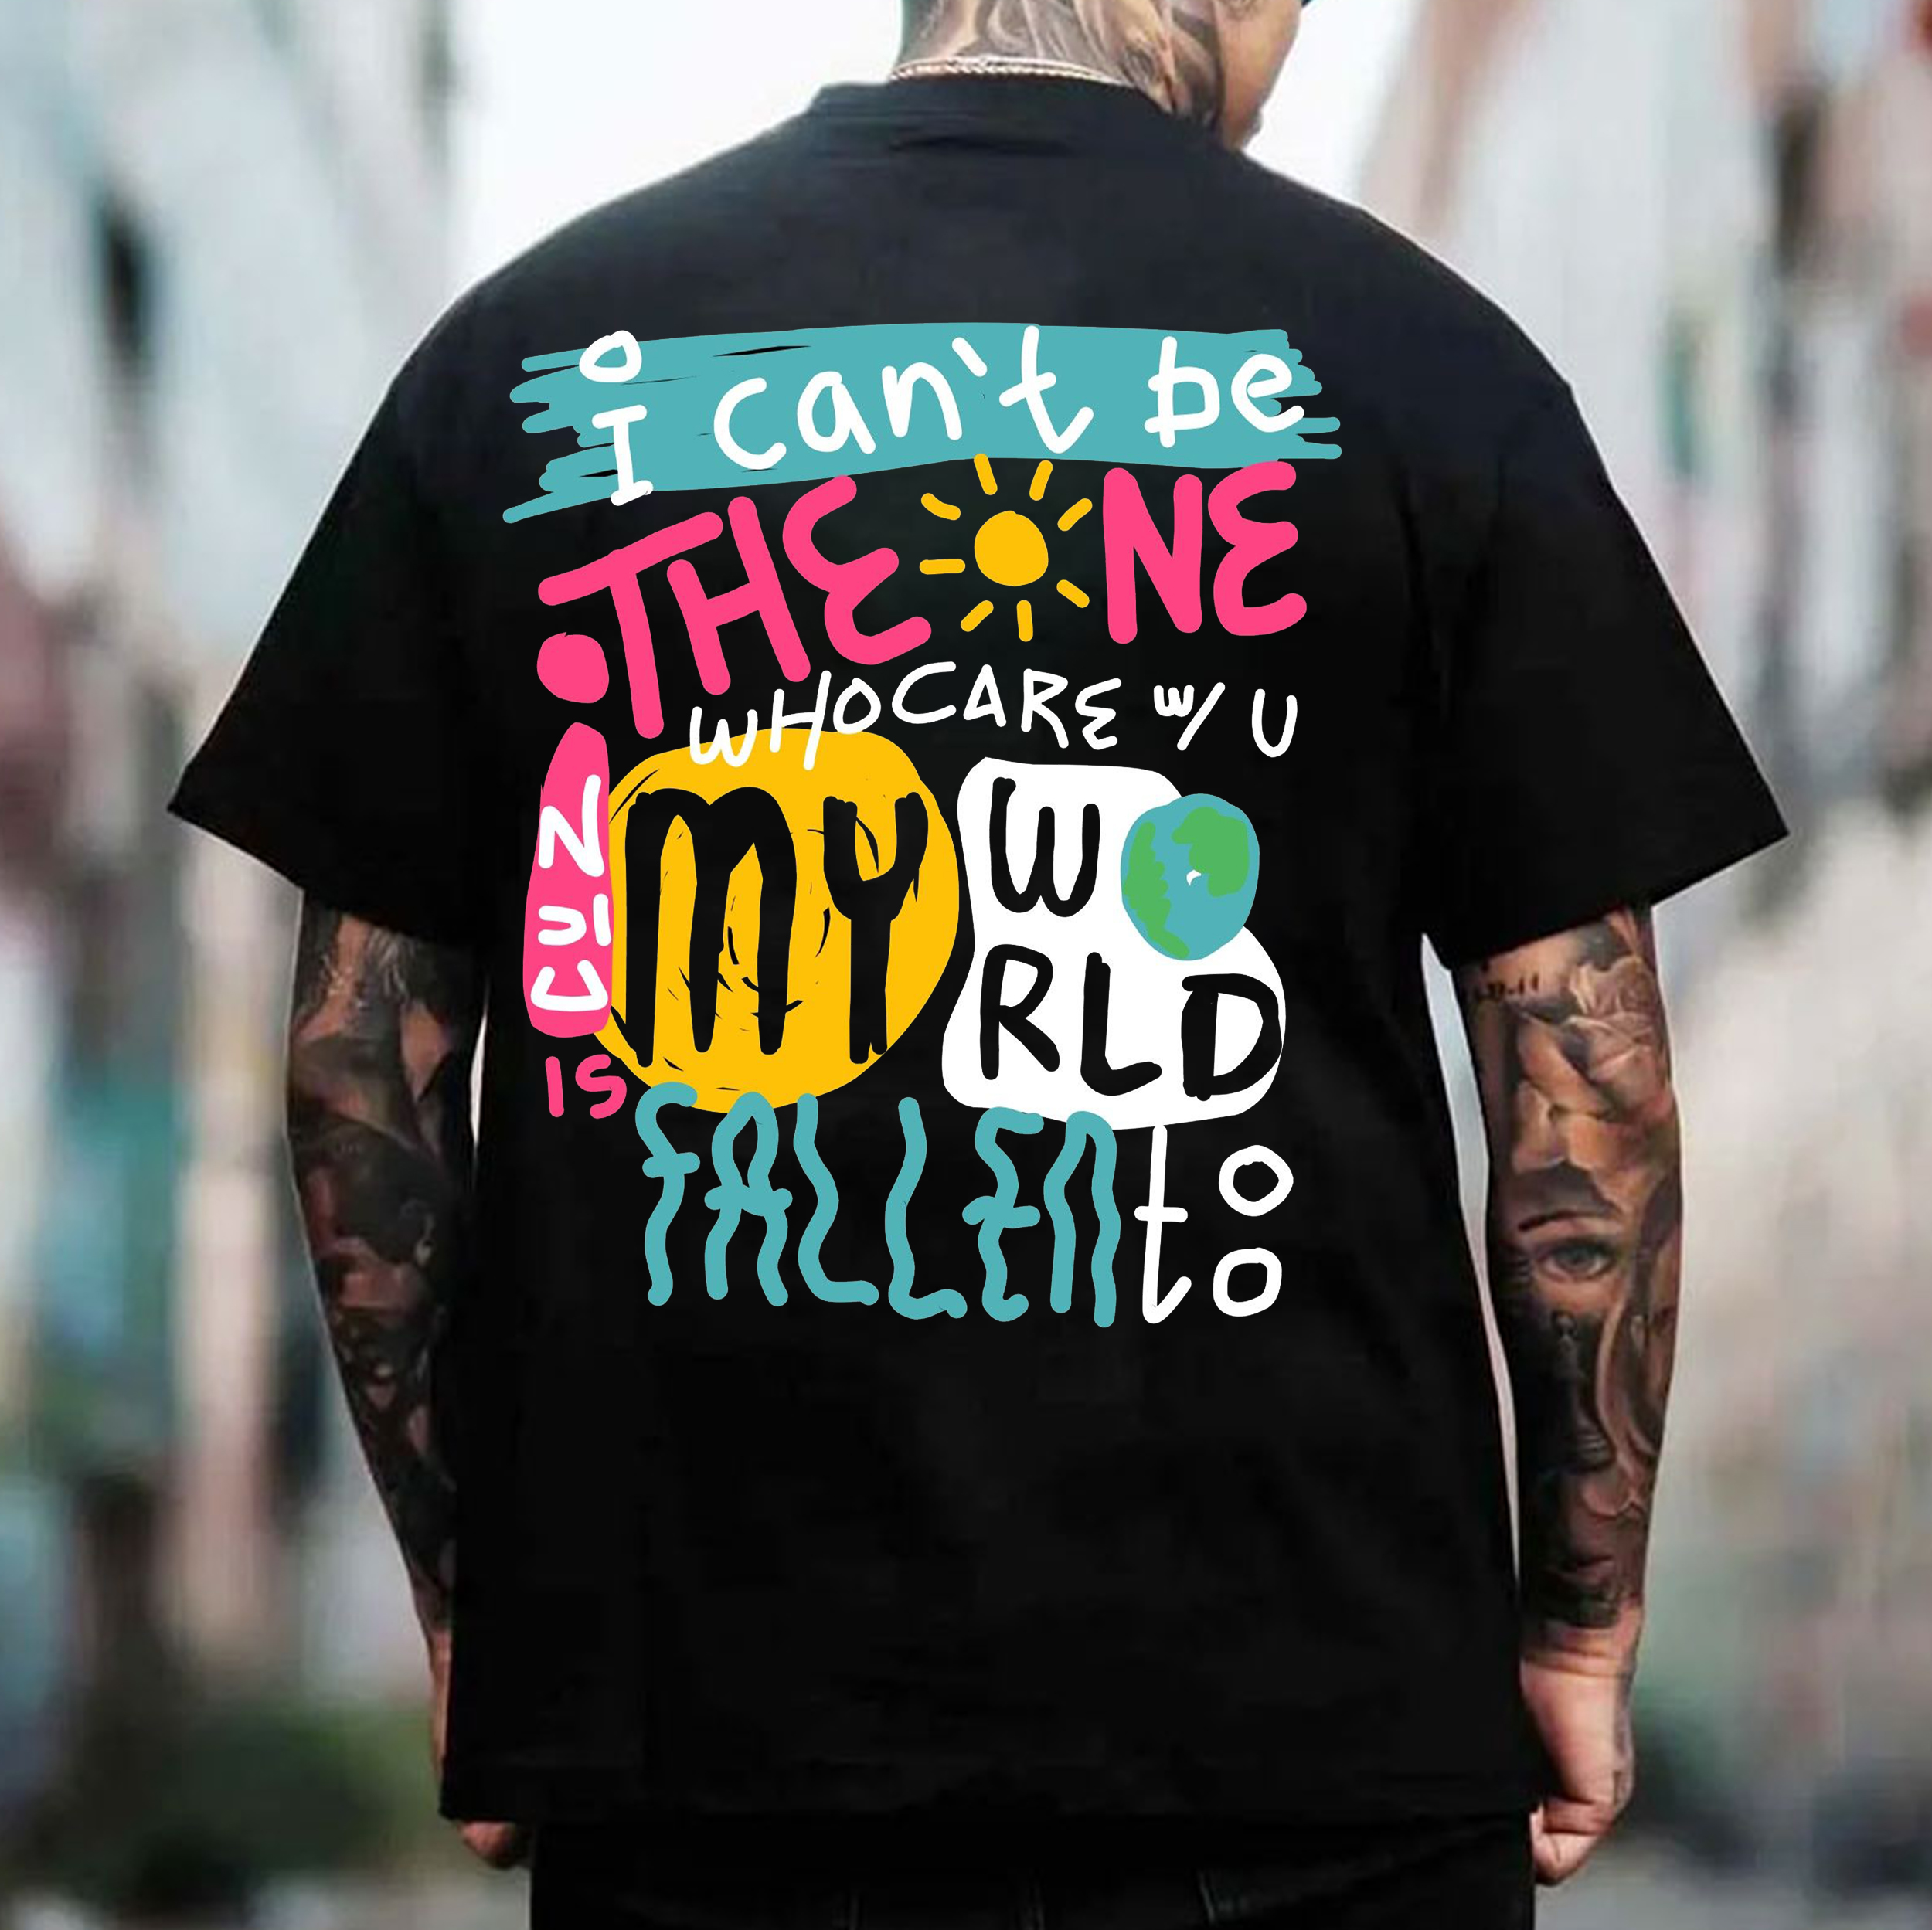 I CAN'T BE THE ONE WHO CARE W/U Graffiti Print Men's T-shirt